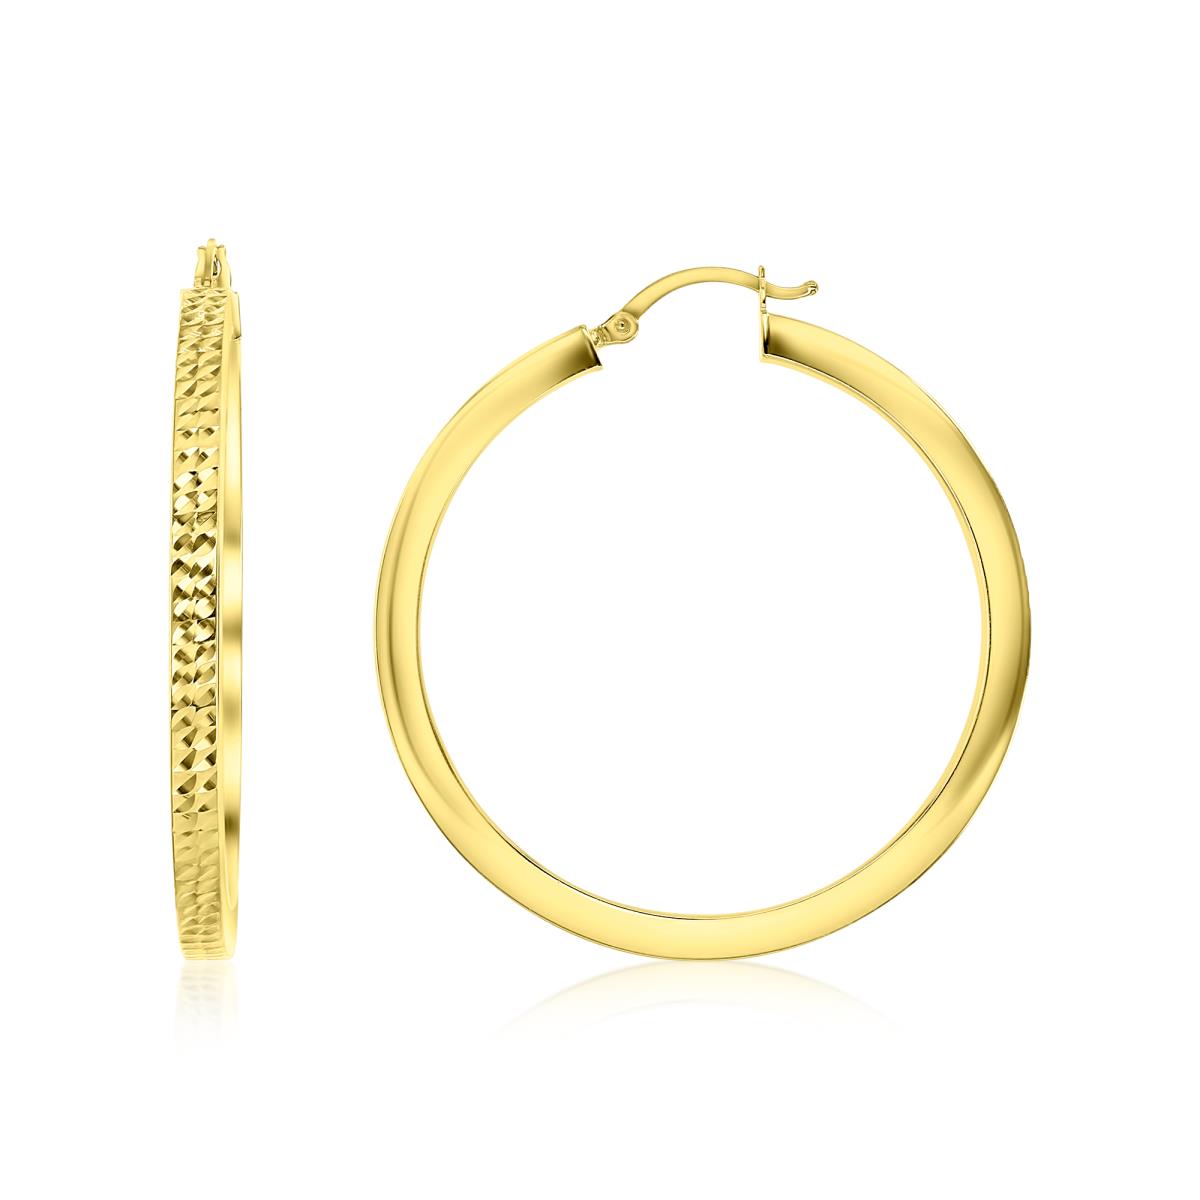 14K Yellow Gold Hand Crafted DC Square Tube Hoop Earrings